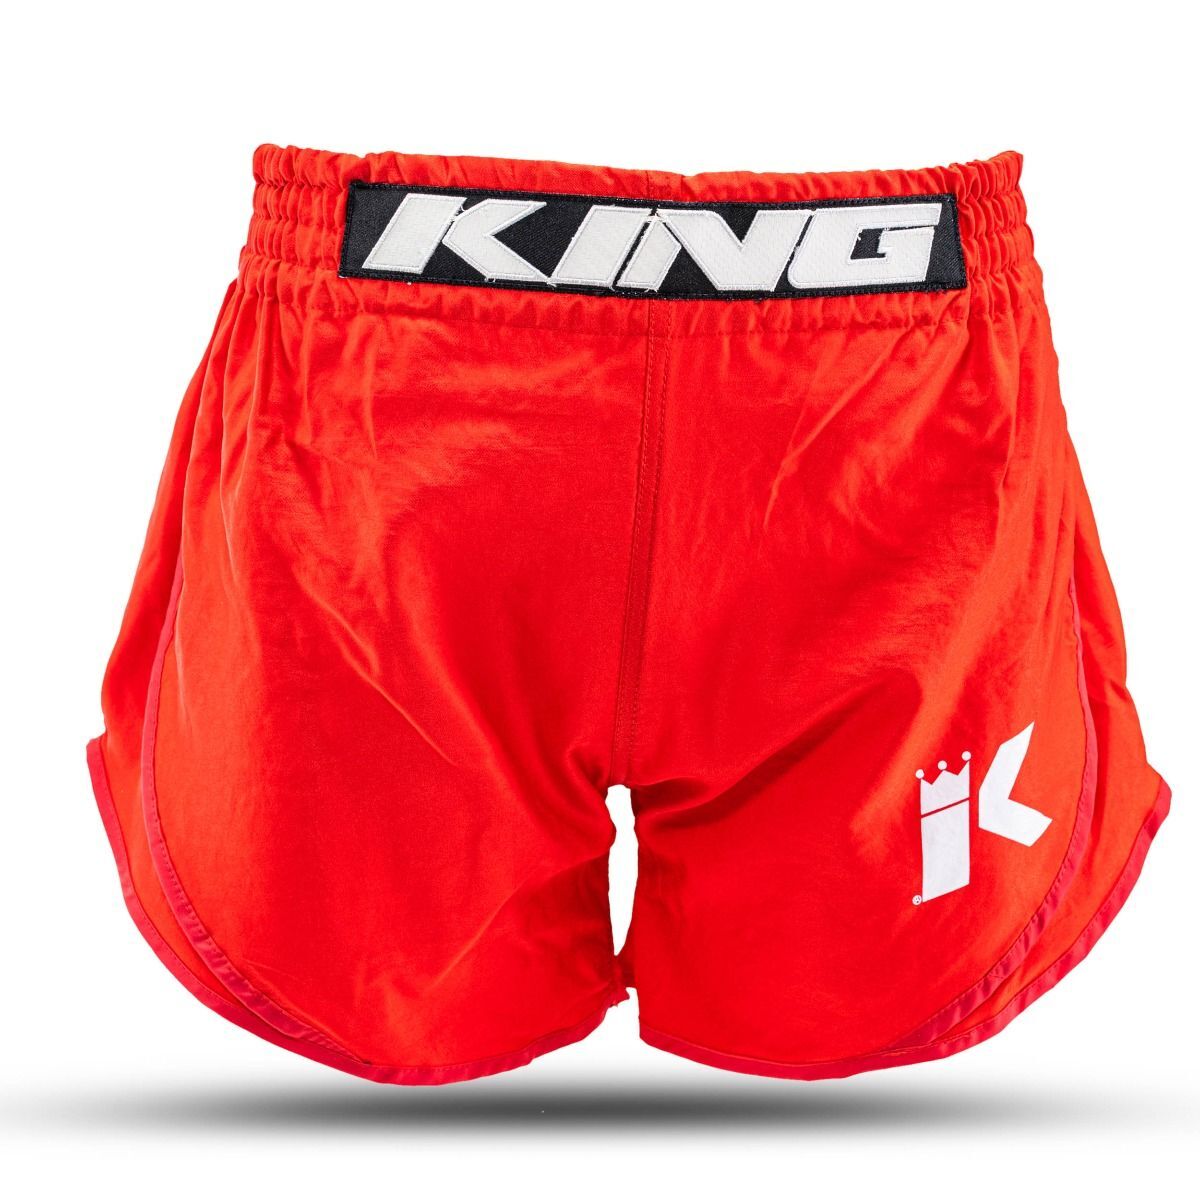 King Pro Boxing - Fightshort - CLASSIC